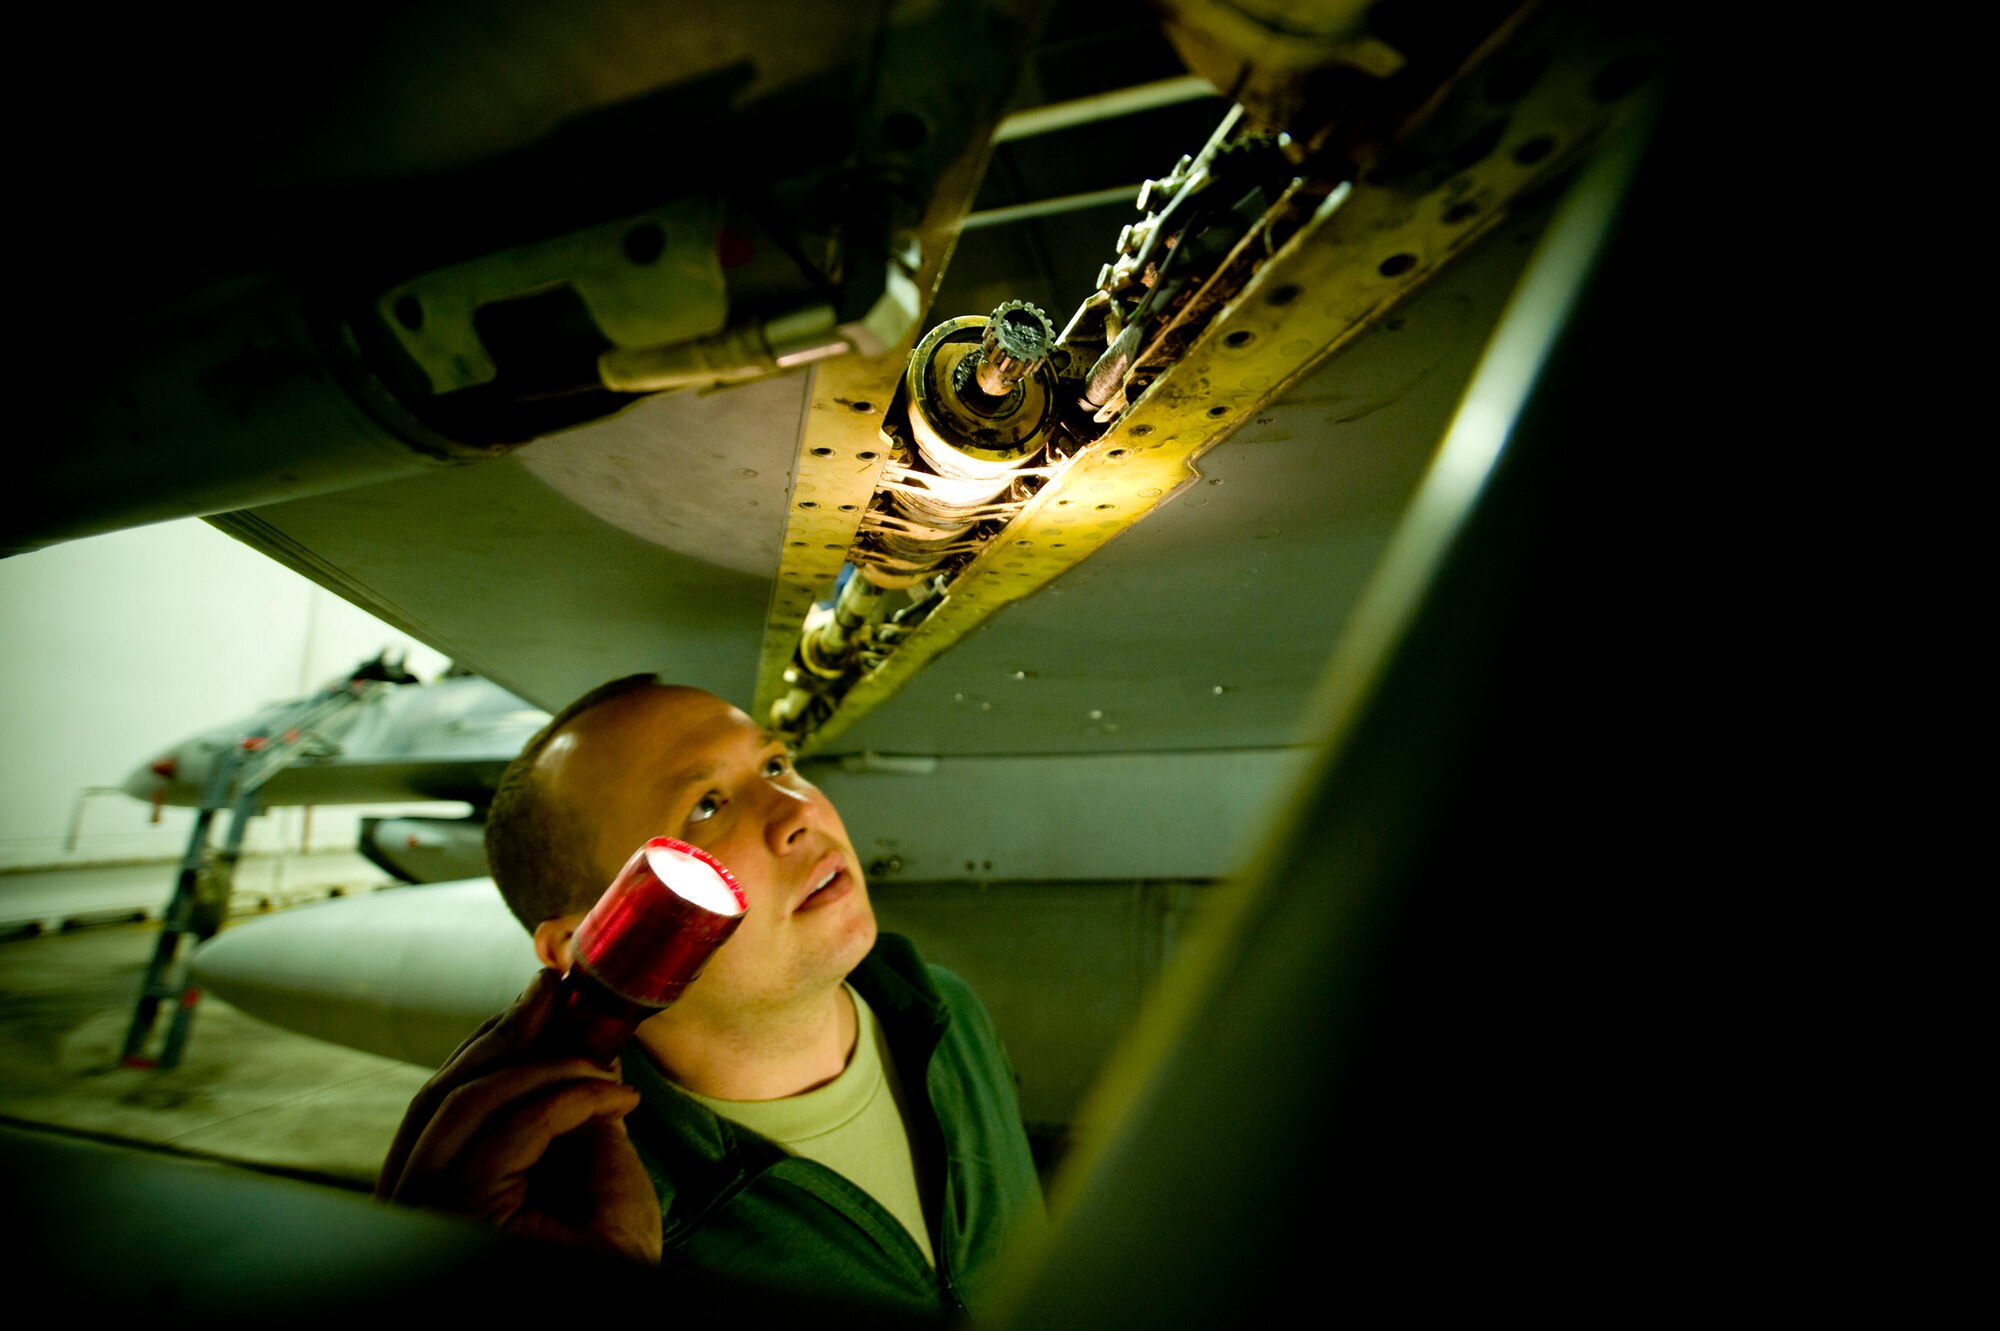 MISAWA AIR BASE, Japan -- Tech. Sgt. Nathan Bechdolt, 122nd Fighter Wing crewchief, inspects the leading edge flap of an F-16 Fighting Falcon March 6, 2009. Sergeant Bechdolt was one of 31 Airmen deployed from the Air National Guard to help the 35th Aircraft Maintenance Squadron during a low-manning period. (U.S. Air Force photo by Staff Sgt. Samuel Morse)